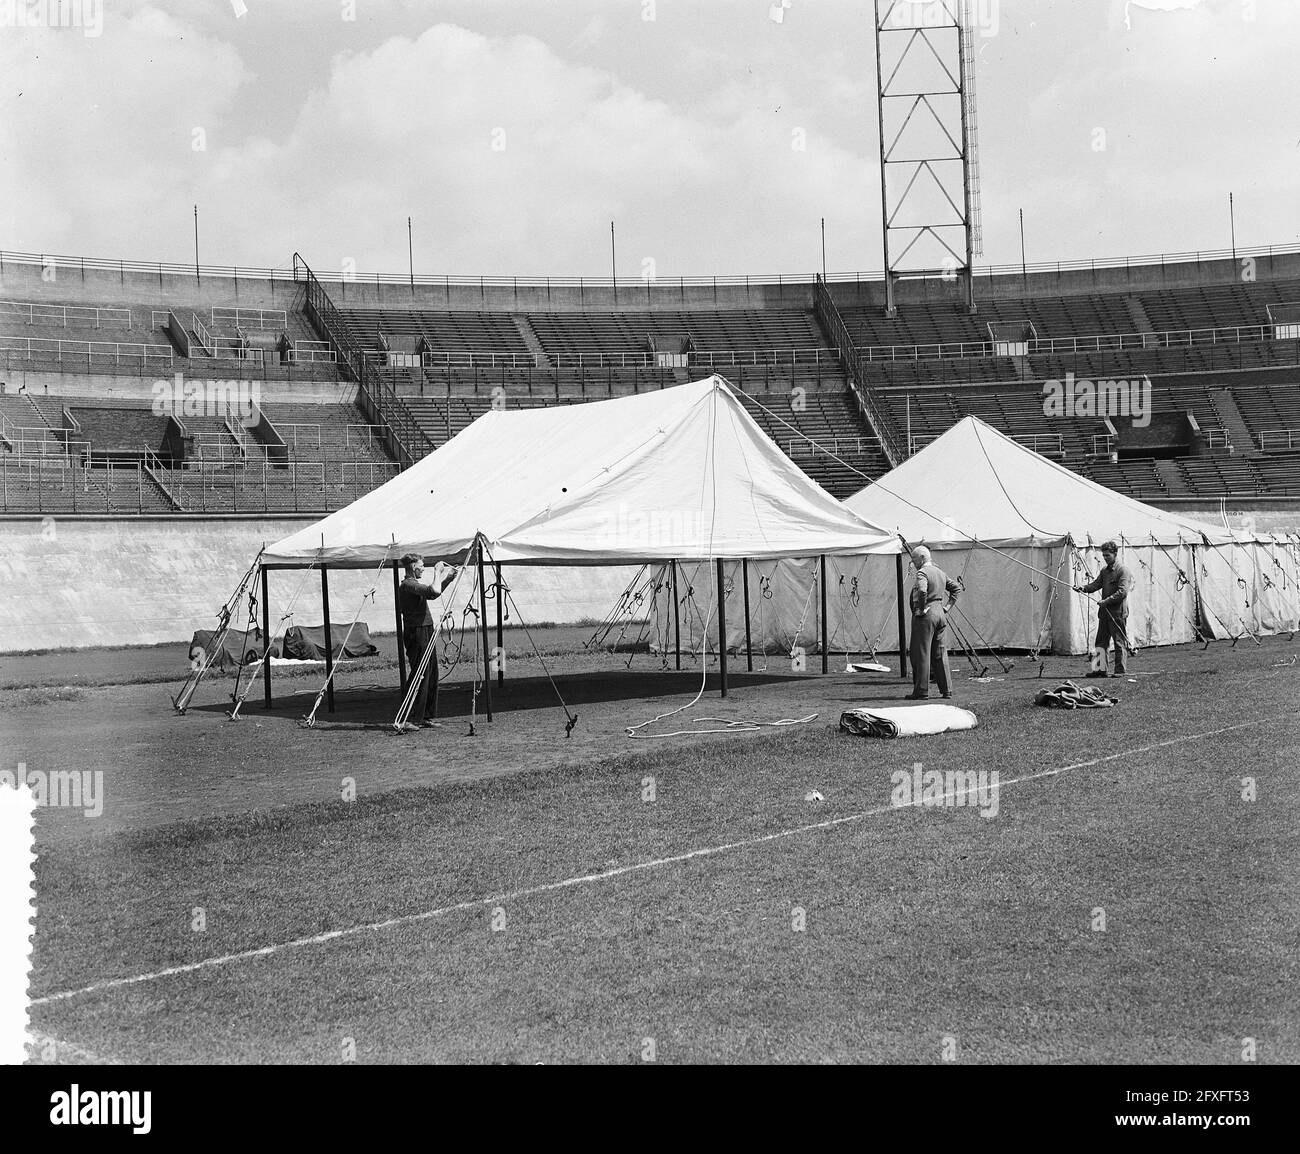 Setting out tents in stadium for riders' quarters Dutch team Tour de France, July 1, 1954, riders' quarters, stadiums, tents, cycling, cycling racing, The Netherlands, 20th century press agency photo, news to remember, documentary, historic photography 1945-1990, visual stories, human history of the Twentieth Century, capturing moments in time Stock Photo